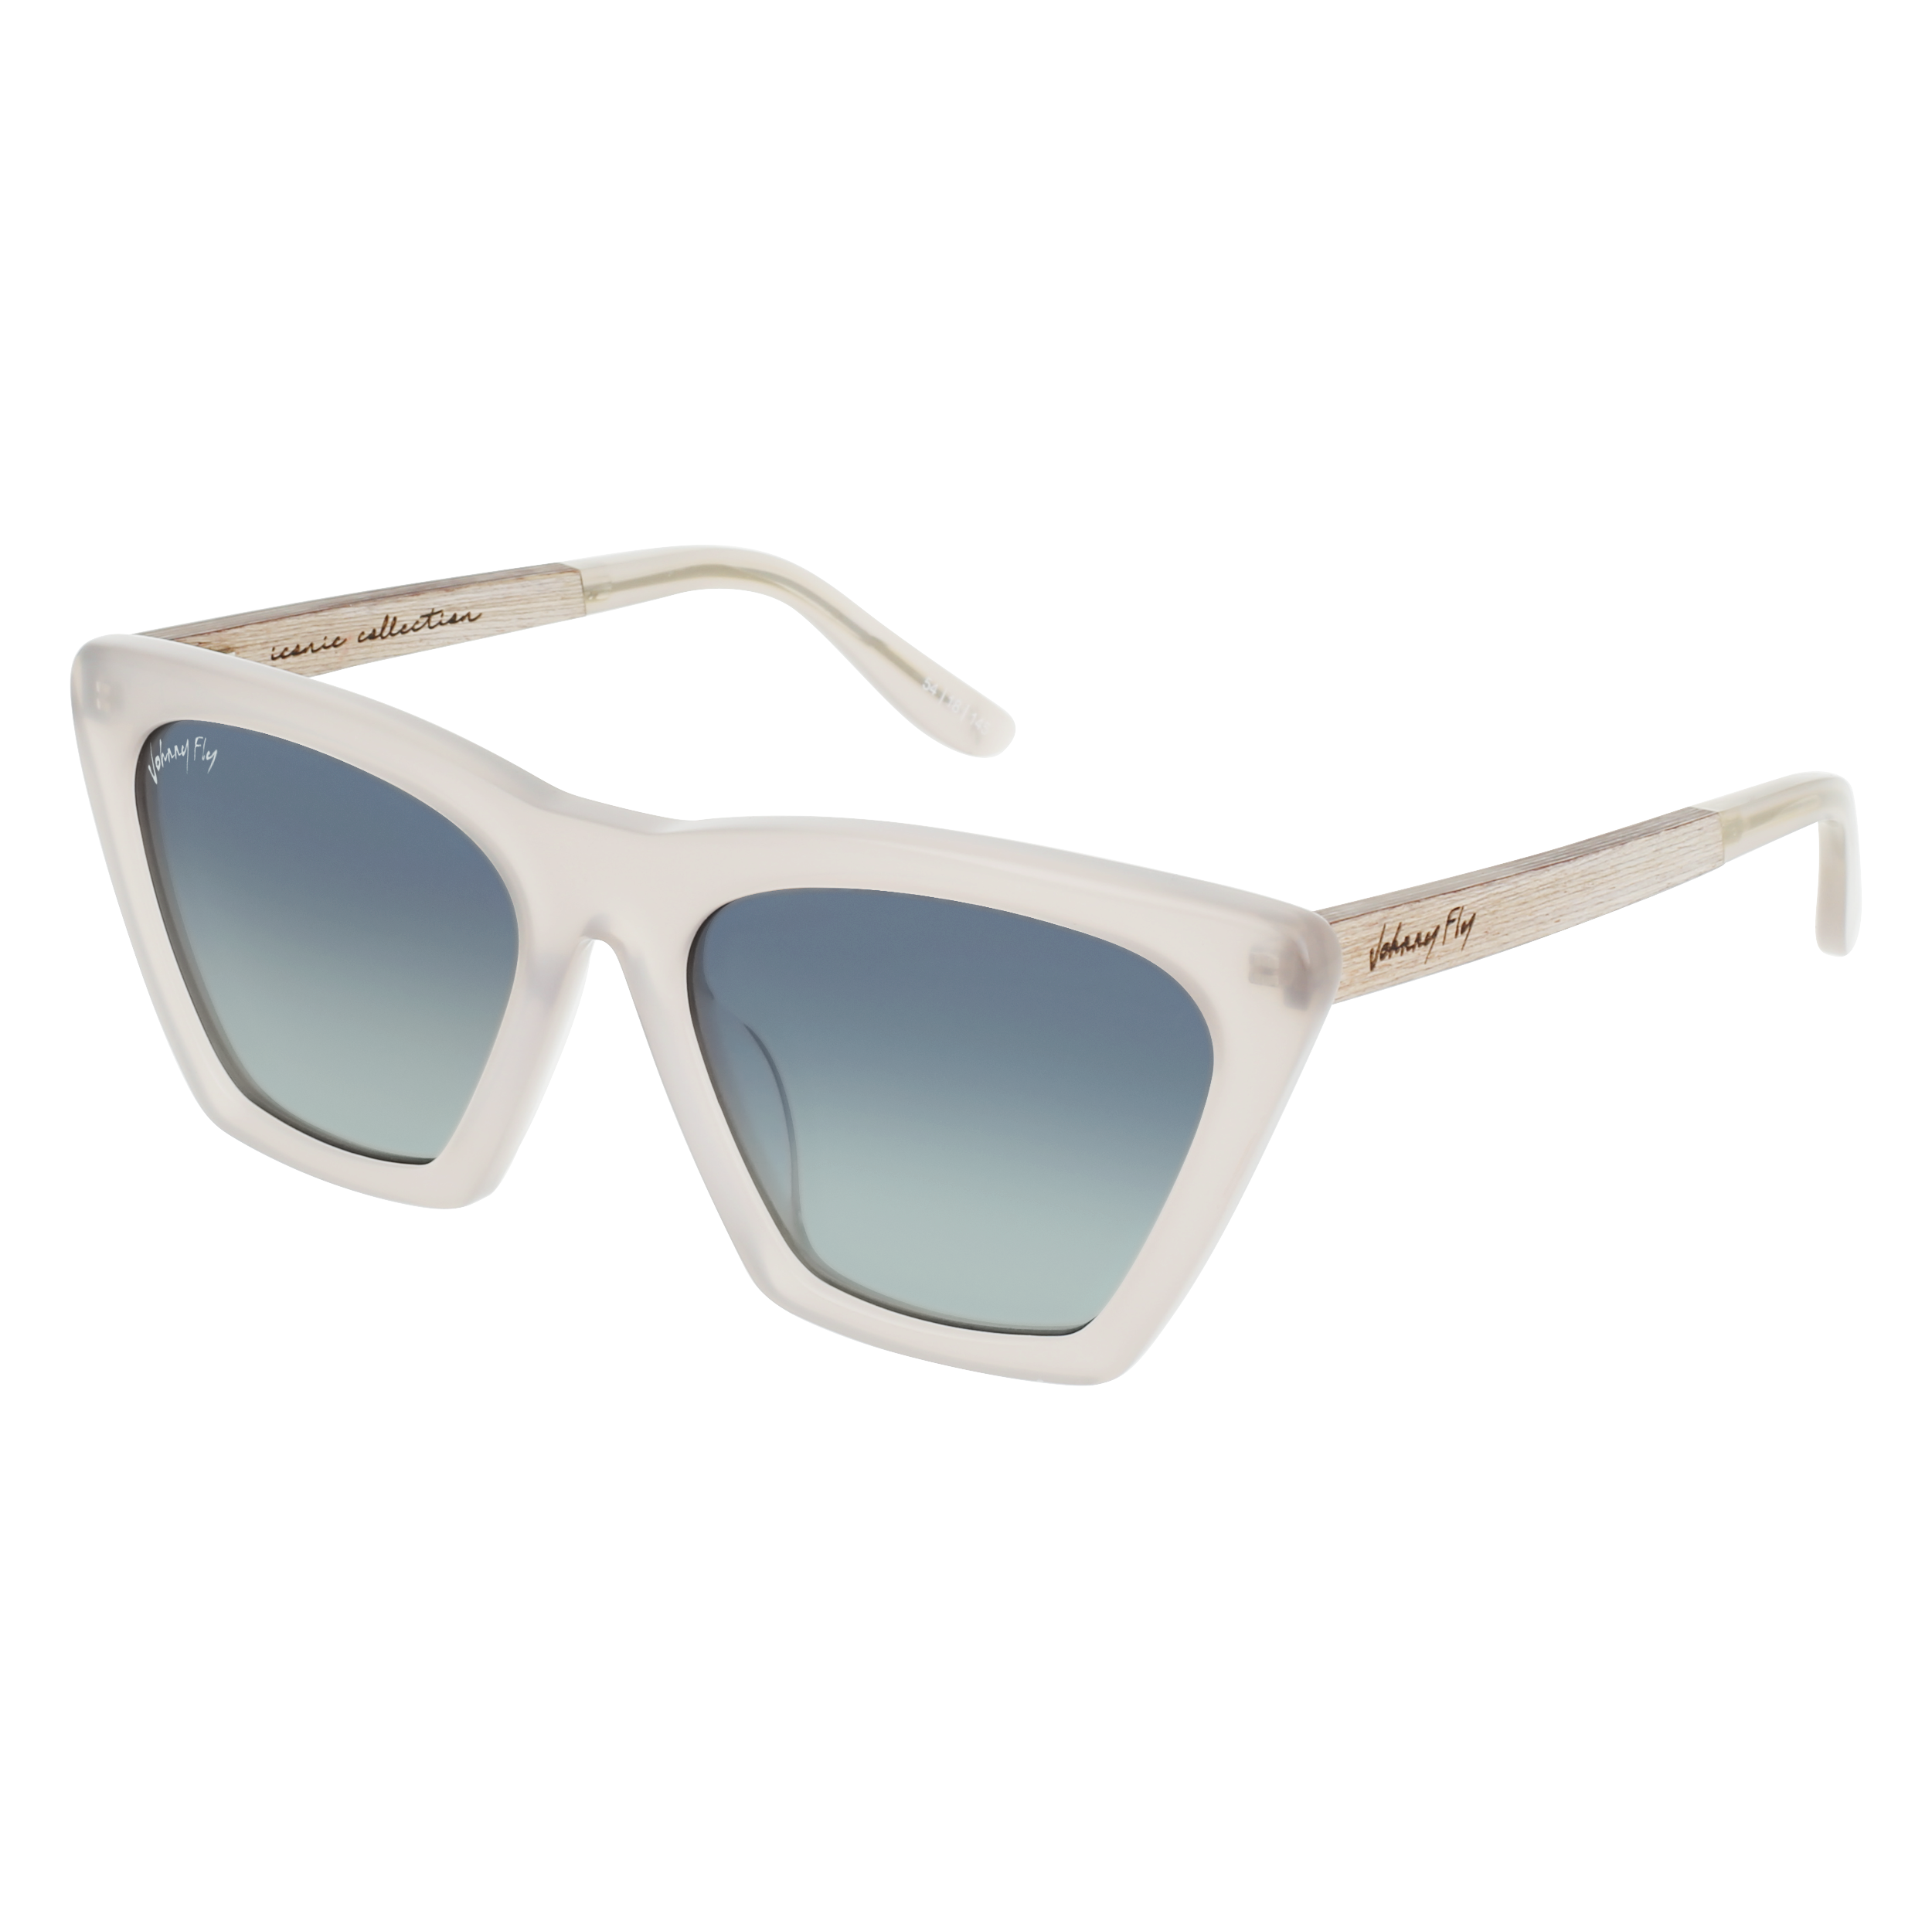 Figure Polarized Sunglasses by Johnny Fly | #color_cloud